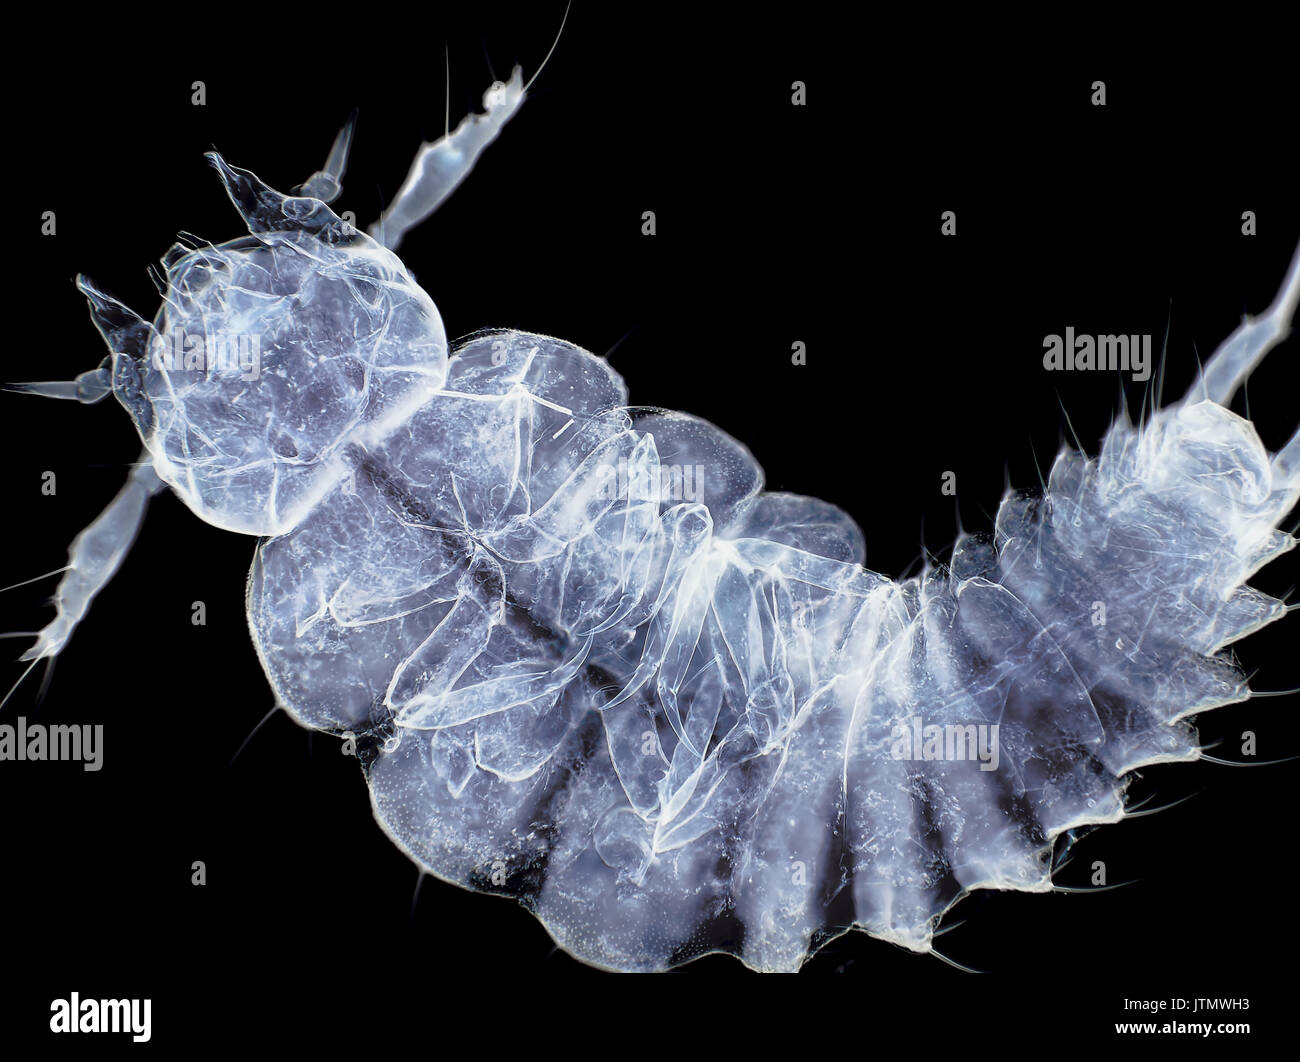 Beetle larva, inverted bright field light micrograph, 60x magnification when printed 10cm wide Stock Photo